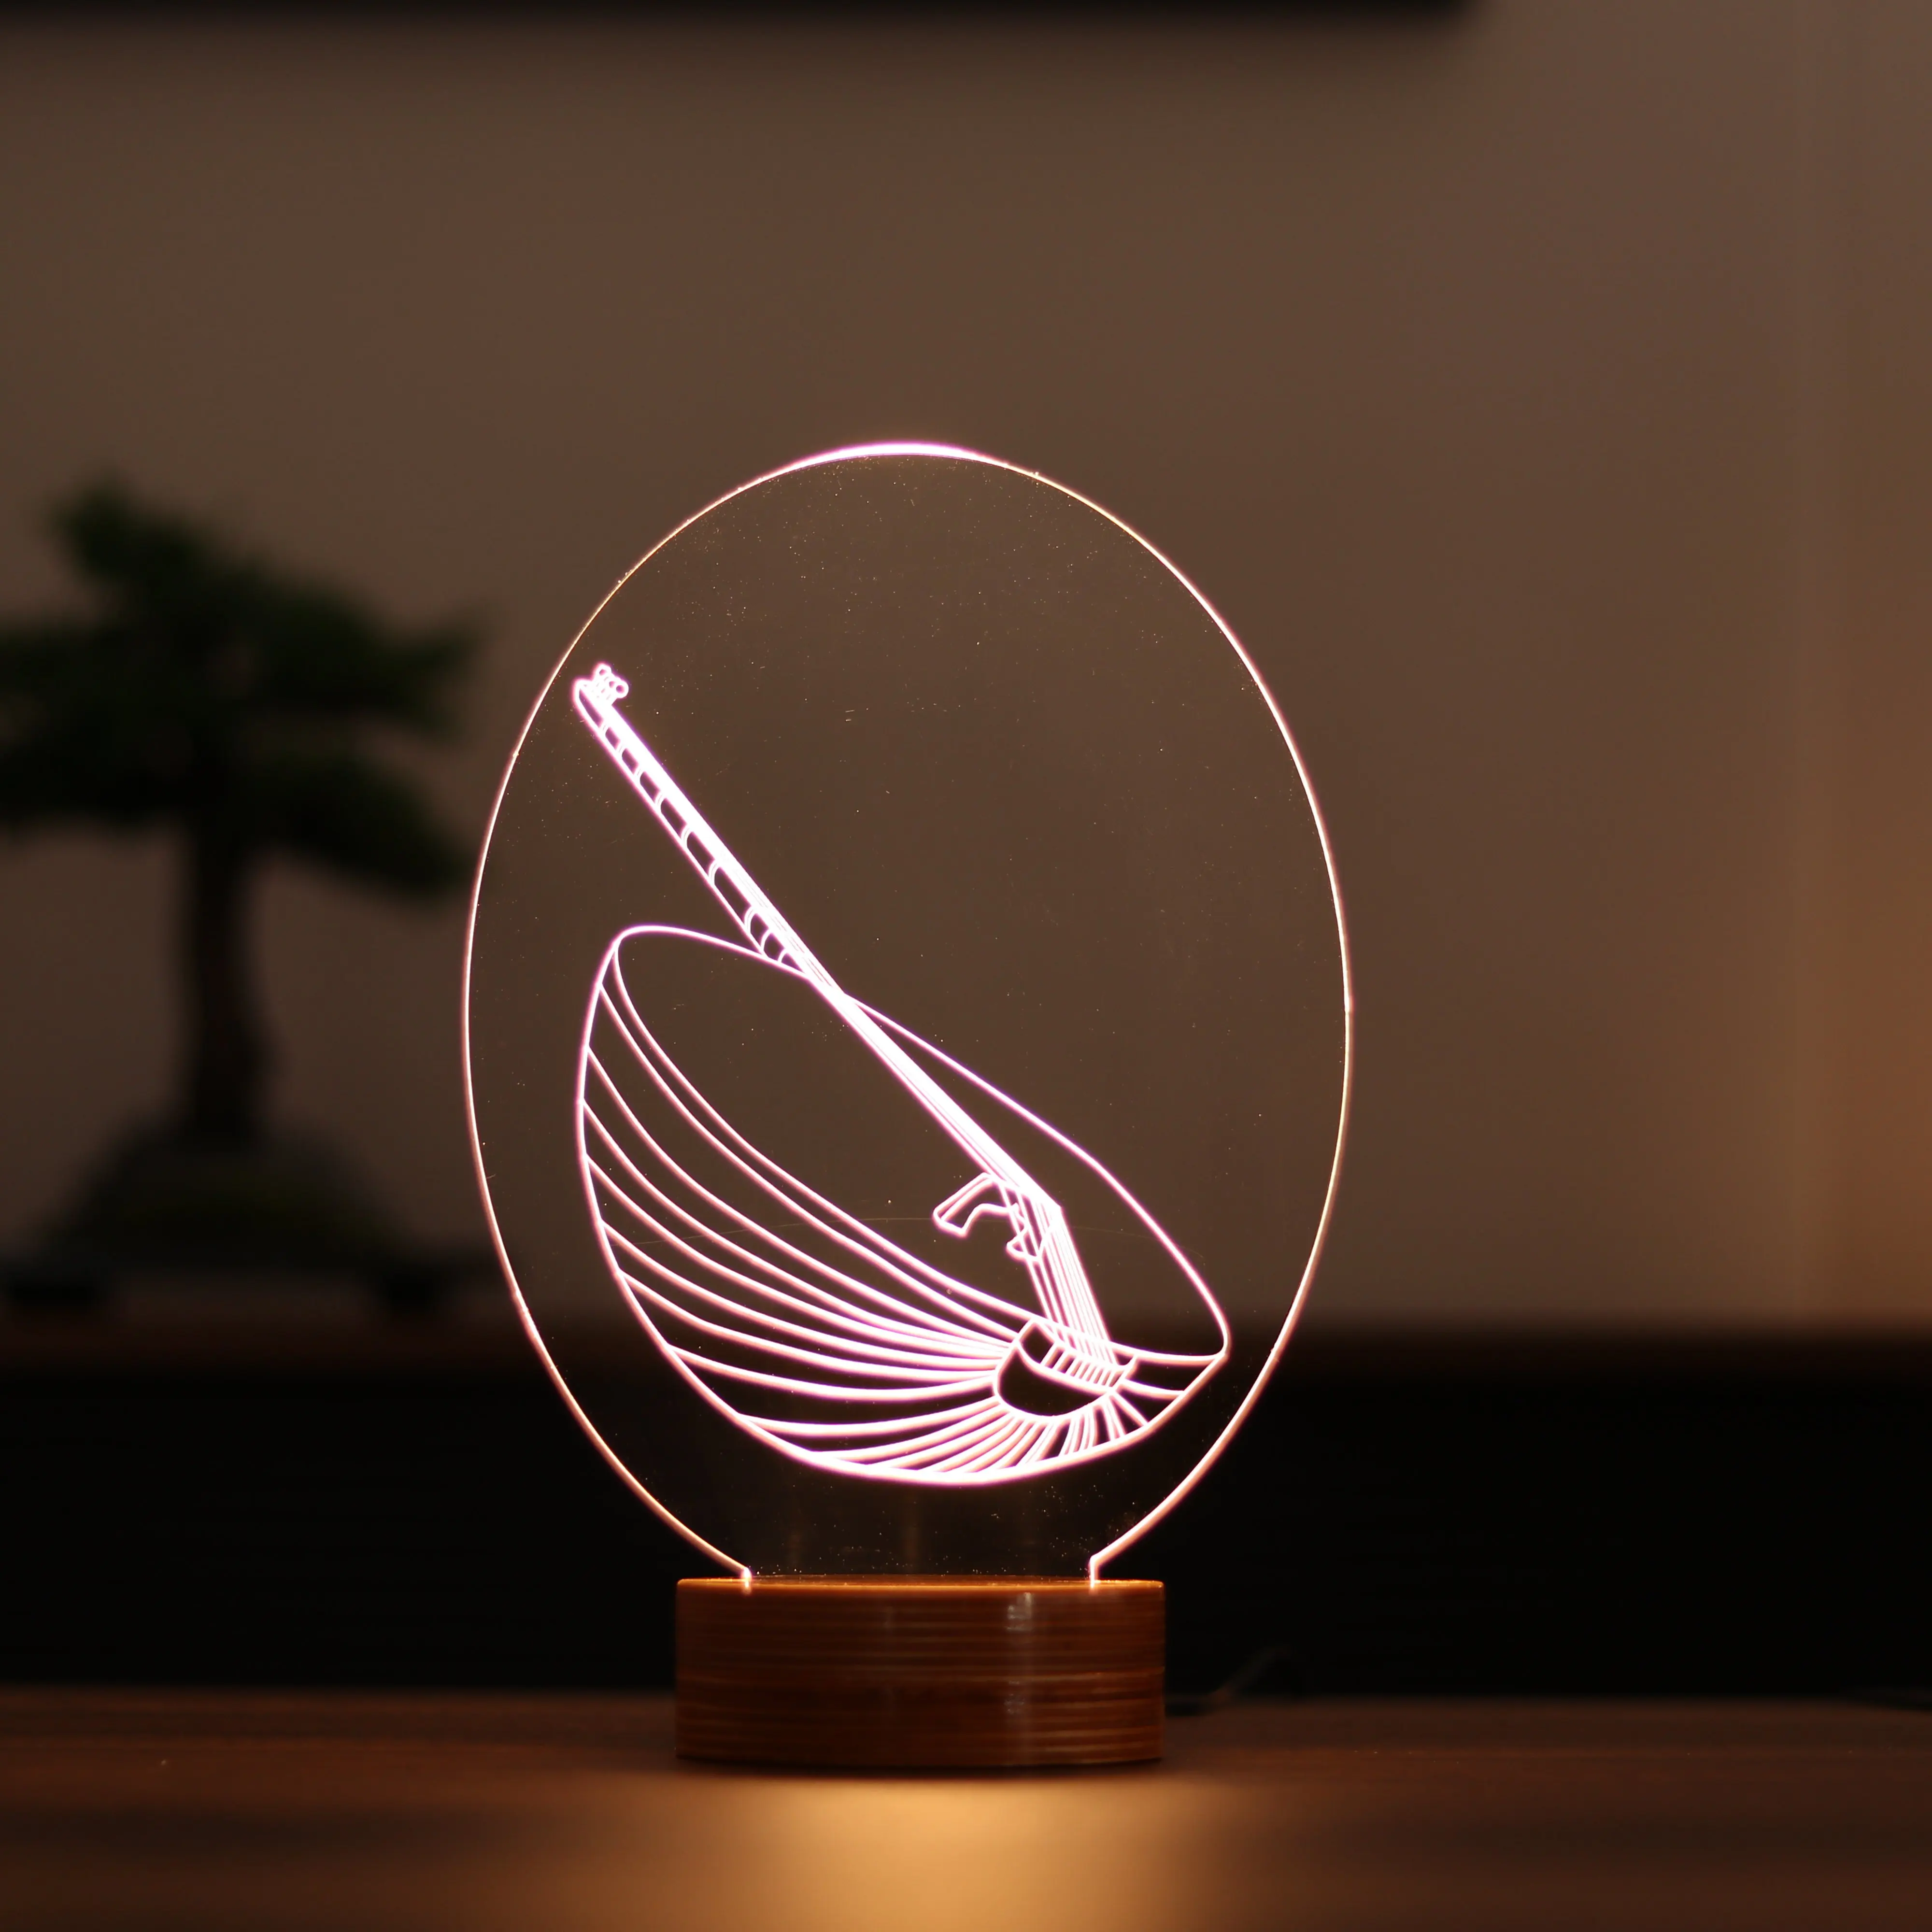 

Drum 12 Volt Adapter 3D Illusion Acrylic Led Lamp Daylight Design Wood Base Gift for Musicians Xmas Christmas Party Decorations Room Decor Anime Wedding Stranger Things Led Lights Wedding Decoration Nightlights Bedroom